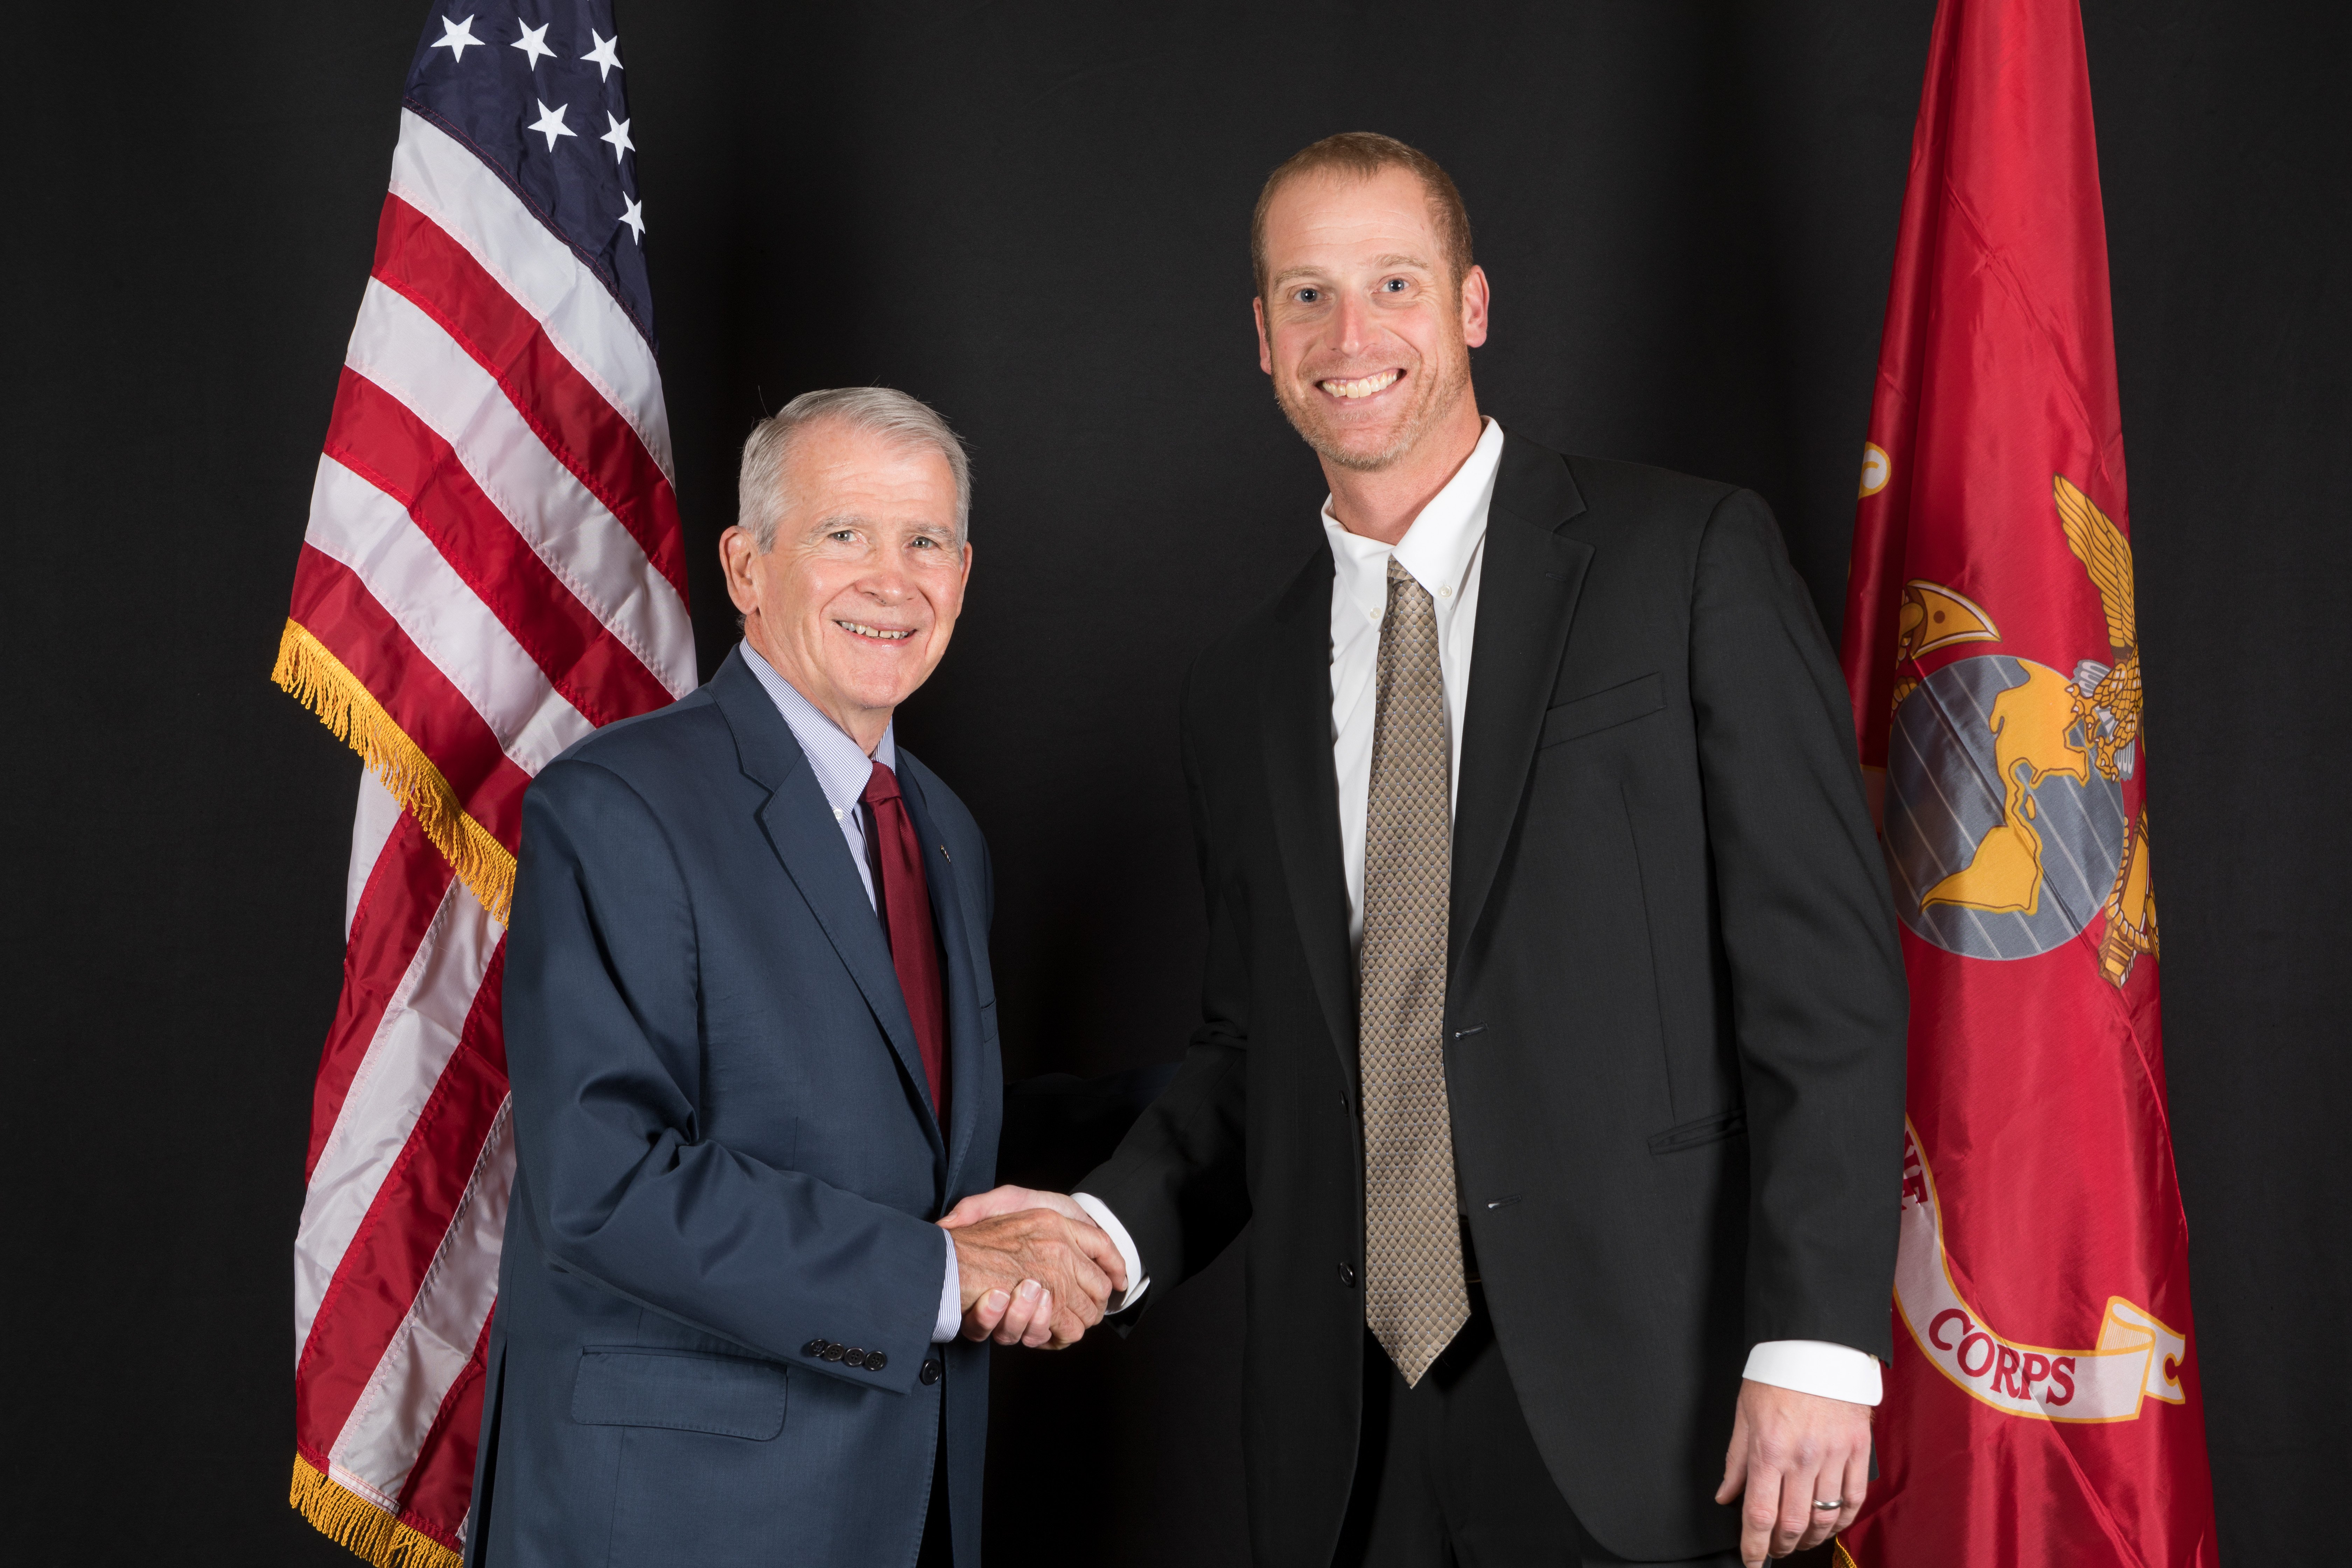 Lt. Col. Oliver North and Jeff England